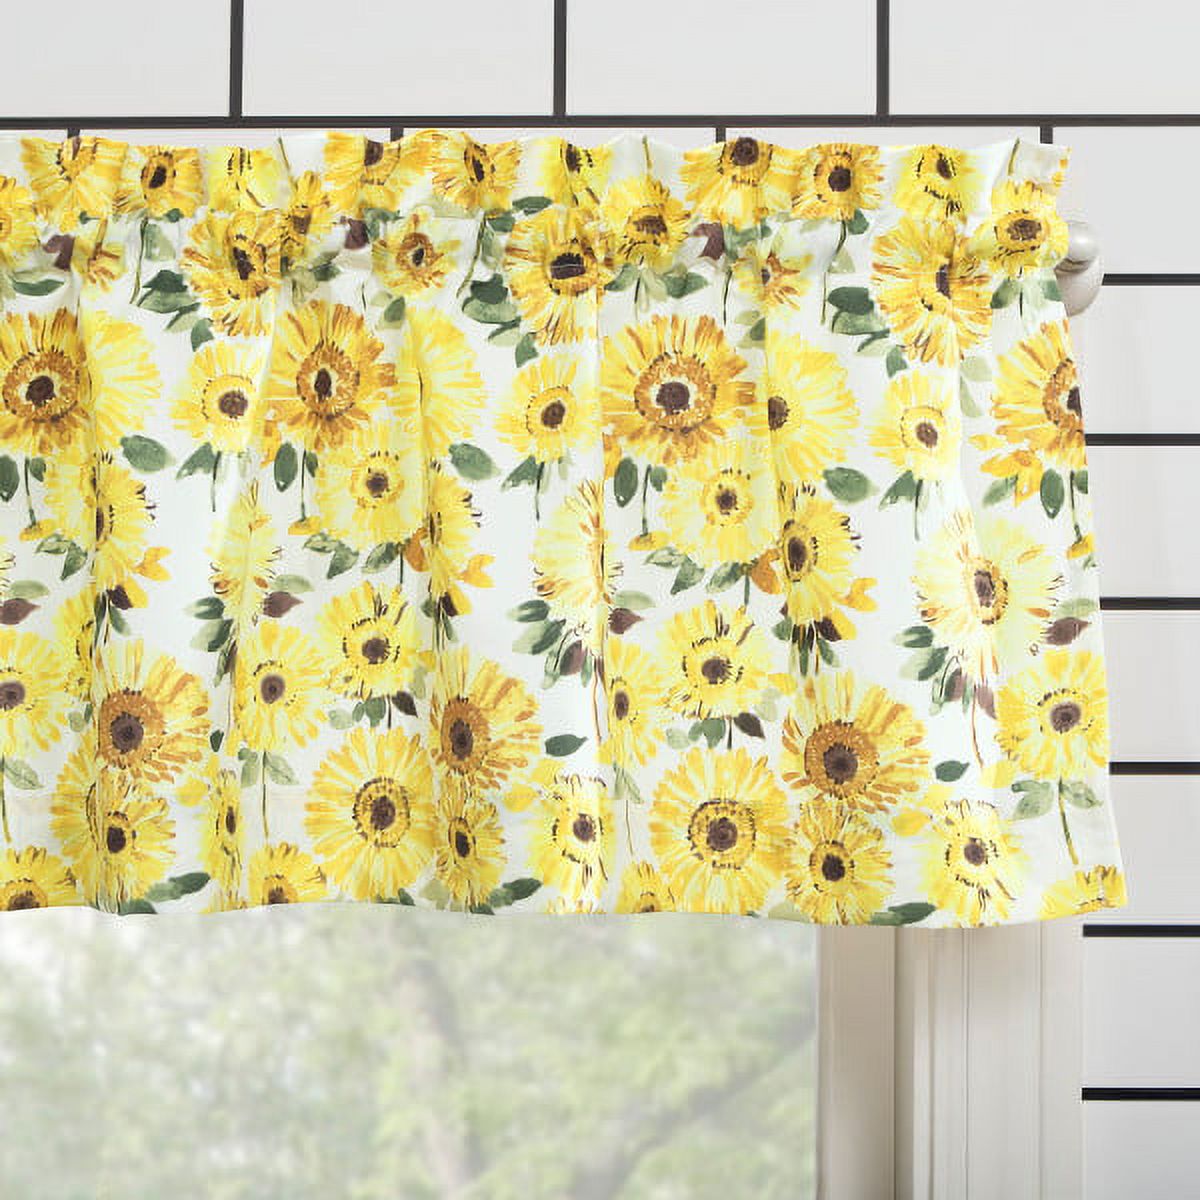 Mainstays Sunflower 3-Piece Kitchen Curtain Tier and Valance Set 54"x 36" in Multi - image 2 of 4